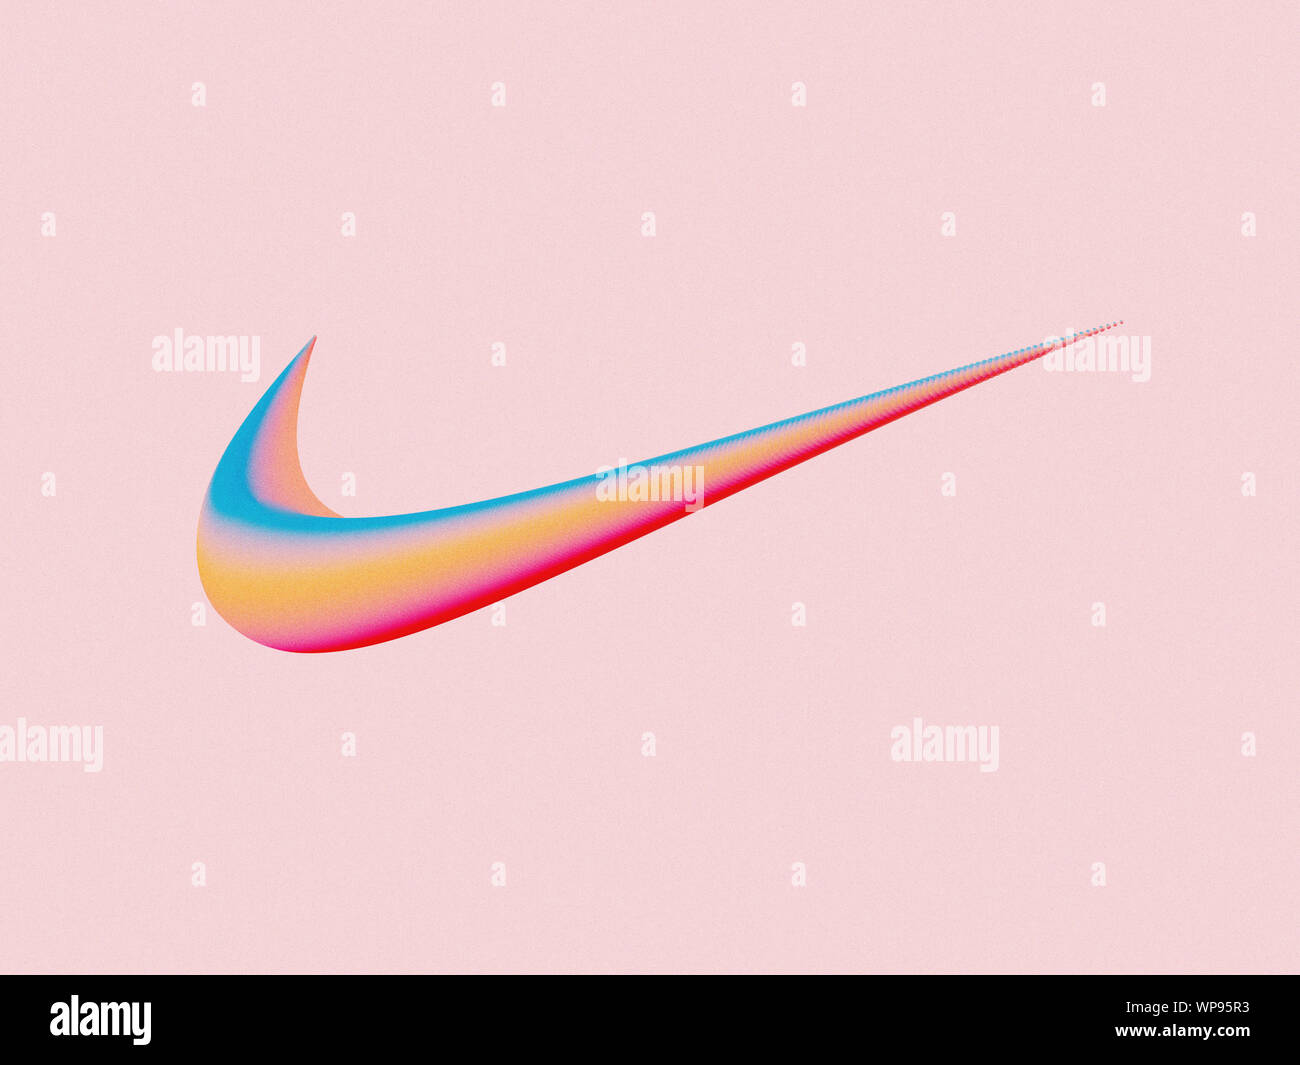 Swoosh Logo High Resolution Stock Photography and Images - Alamy